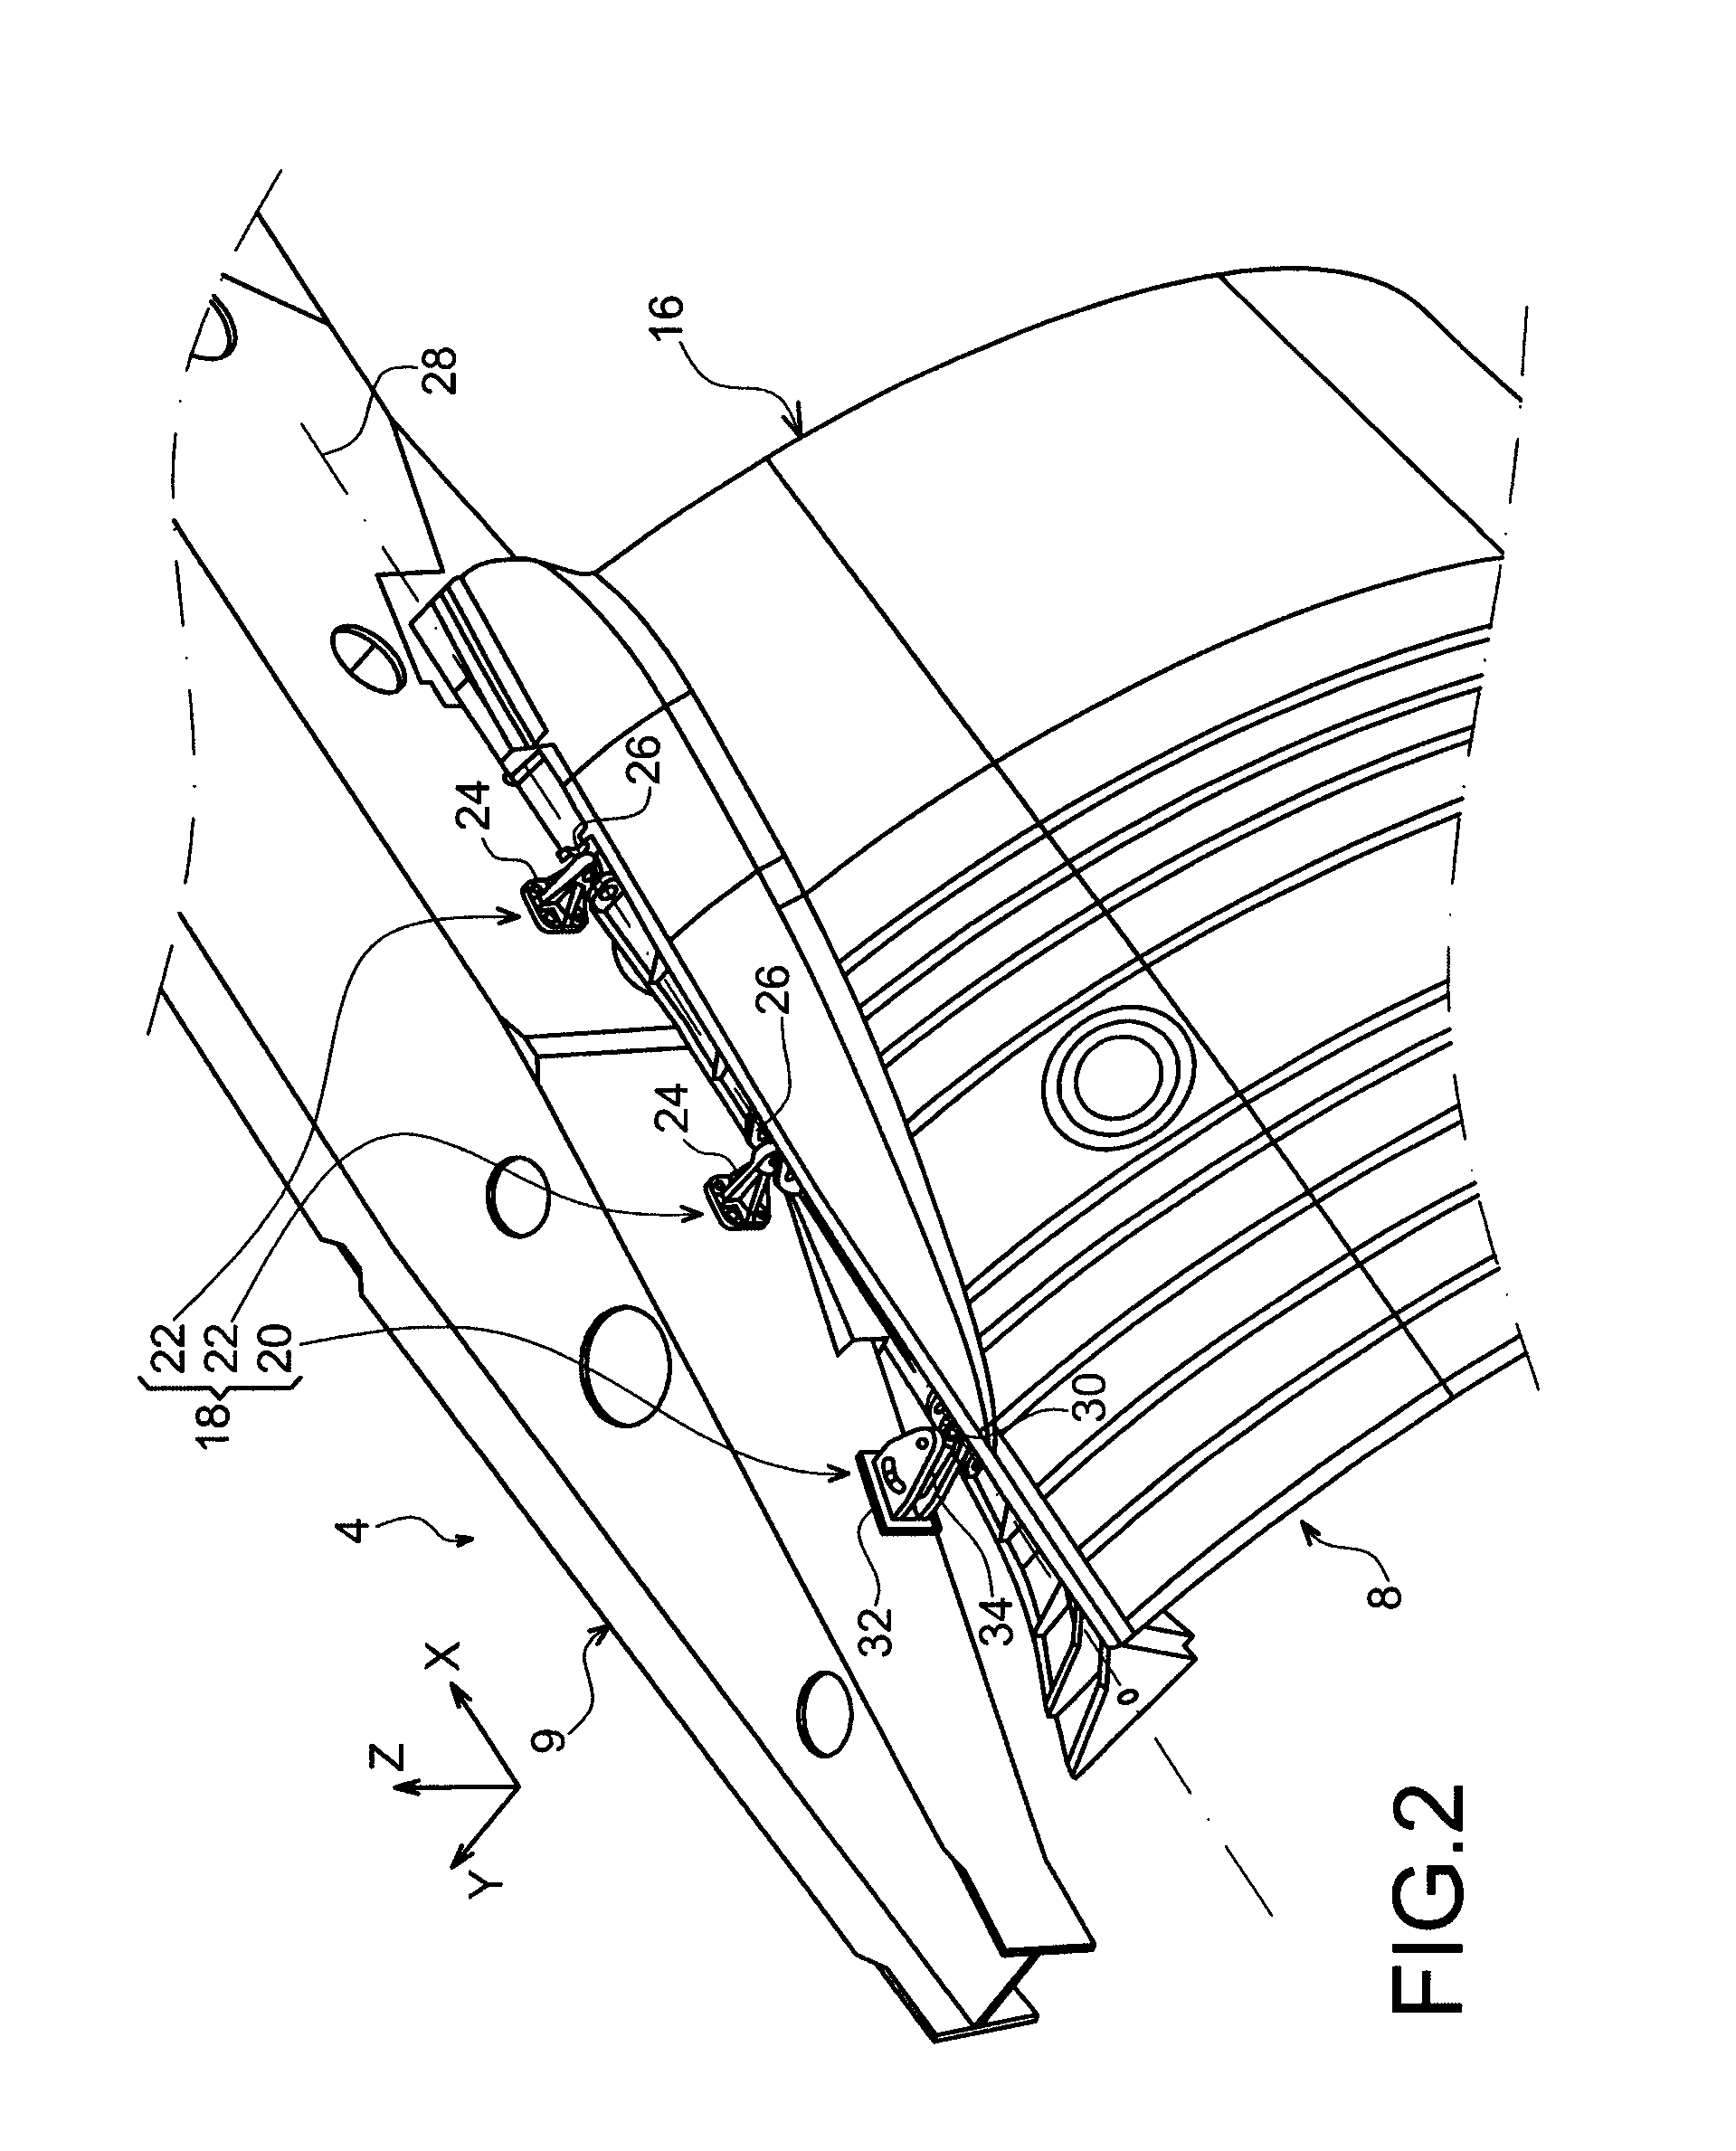 Hinge device of a nacelle cowling of an aircraft engine on a supporting structure